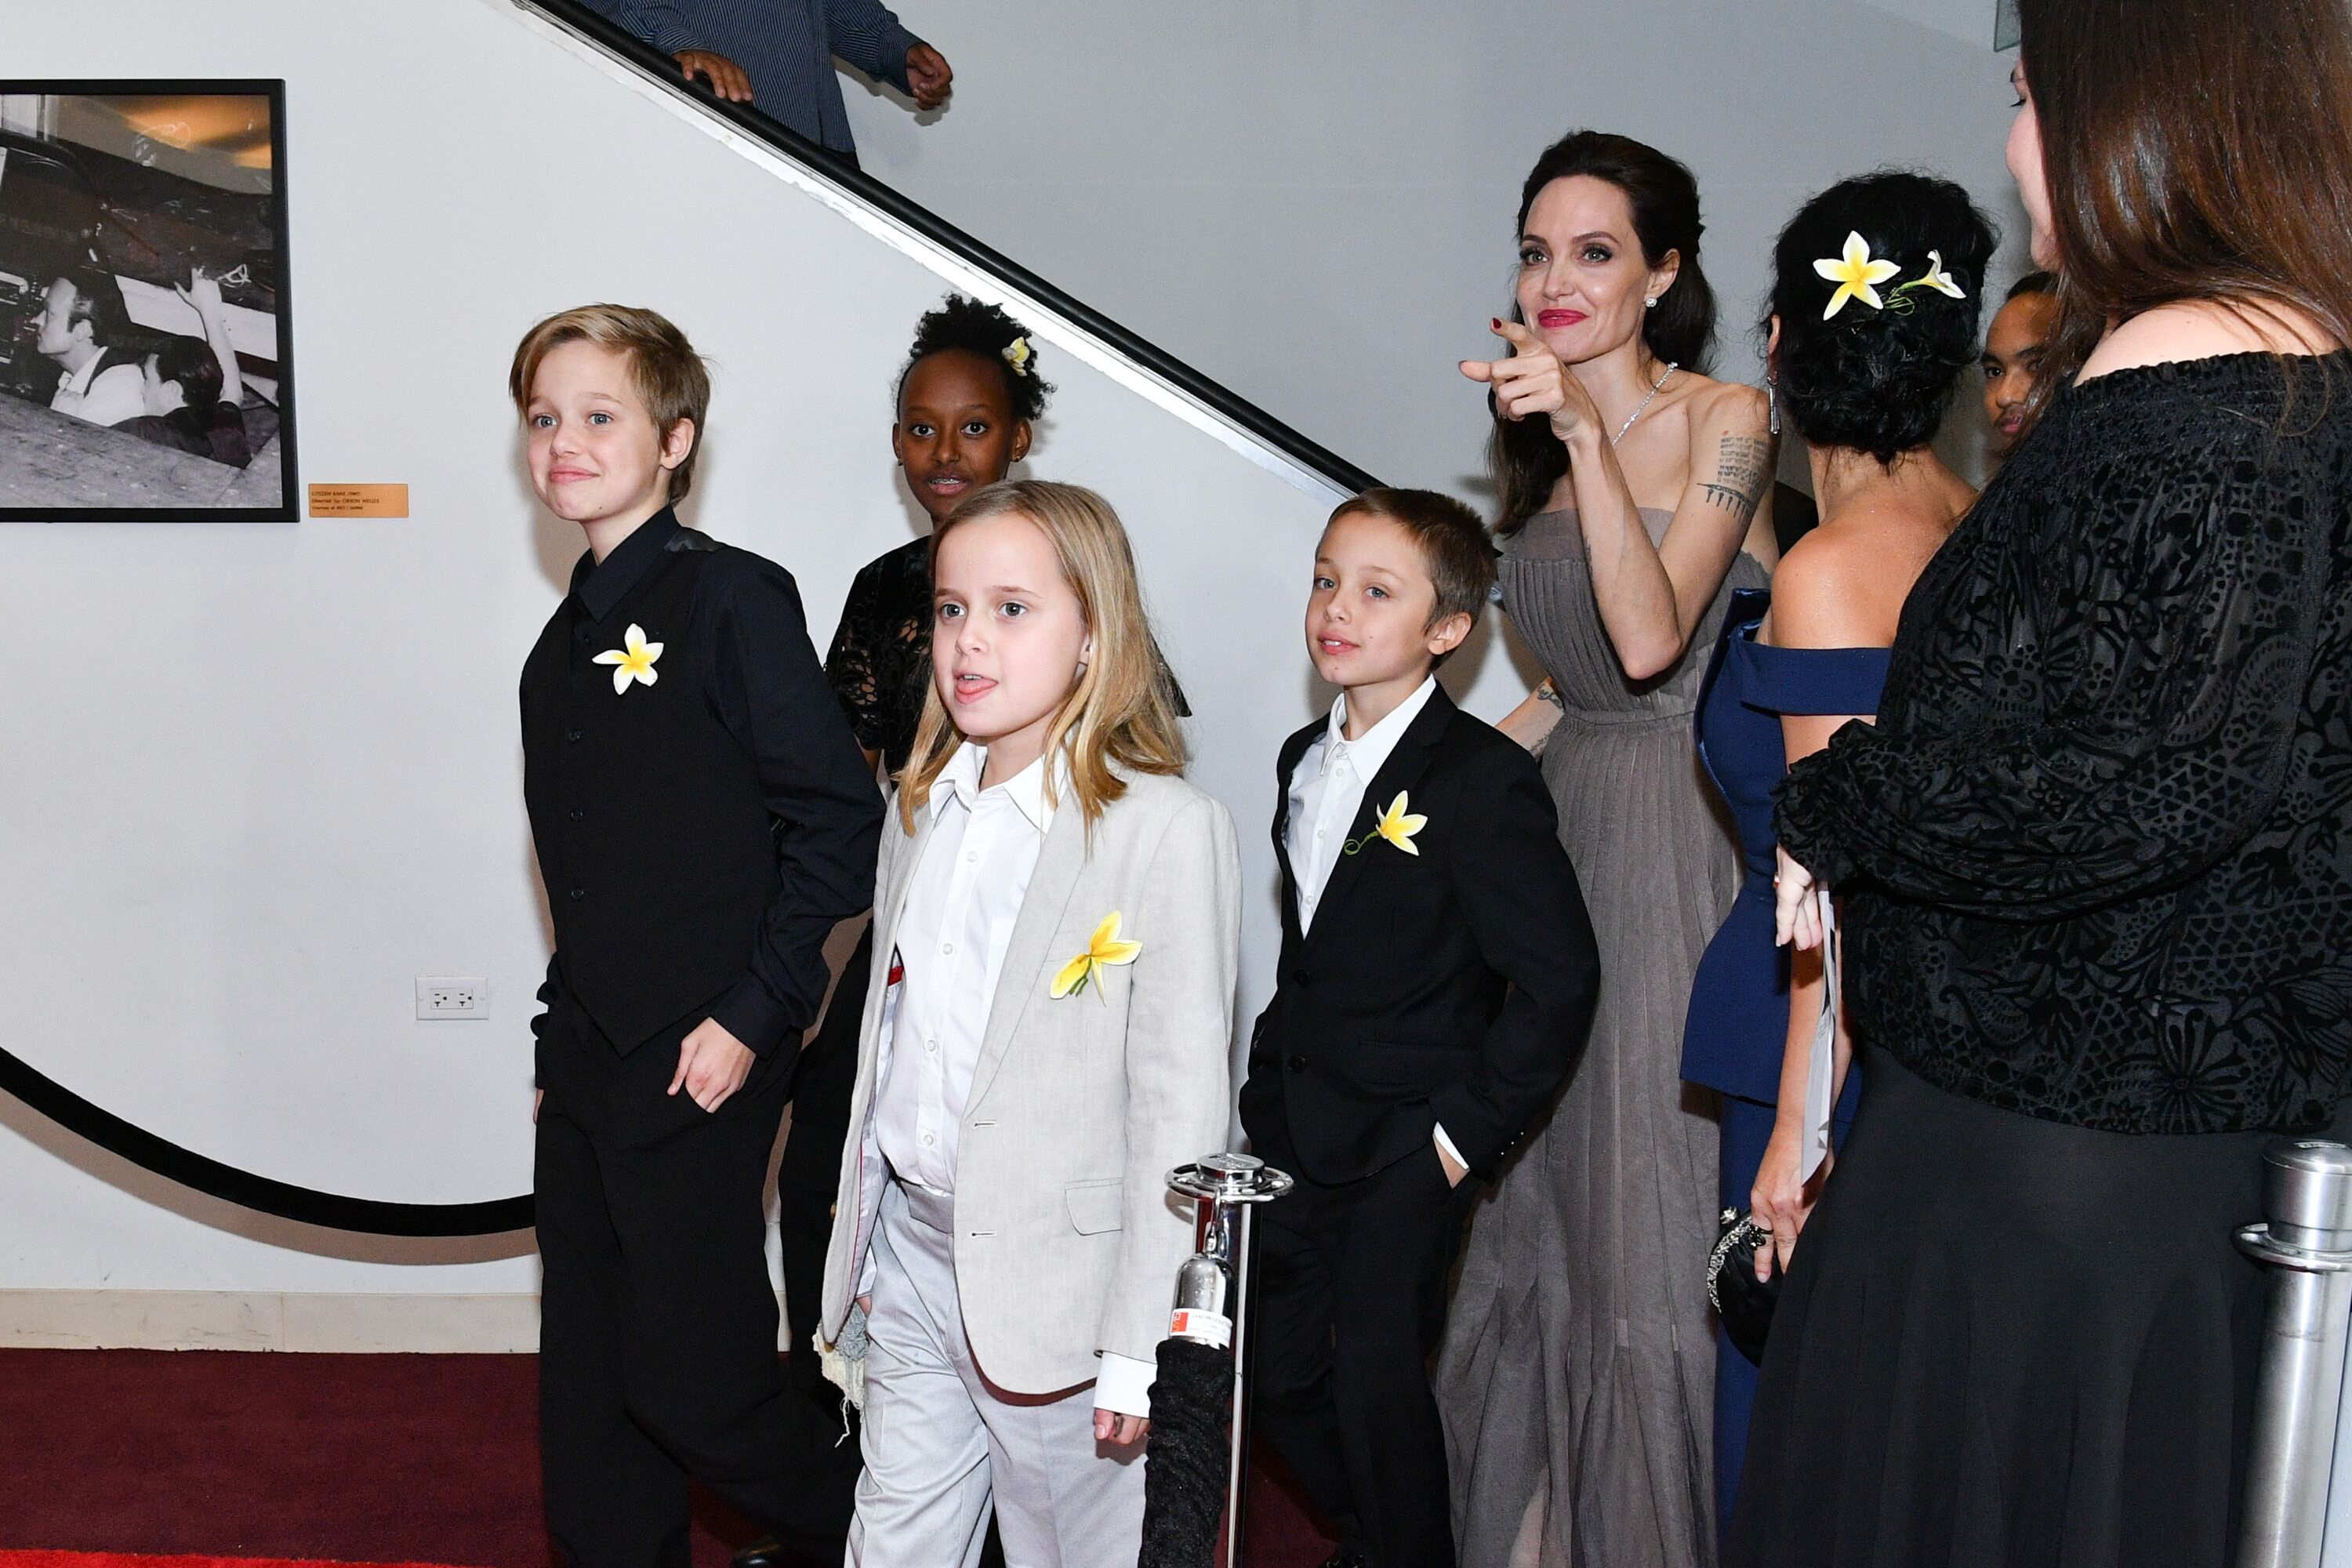 Shiloh Jolie-Pitt, Zahara Jolie-Pitt, Vivienne Jolie-Pitt, Knox Leon Jolie-Pitt, and Angelina Jolie attend the "First They Killed My Father" New York premiere | Source: Getty Images